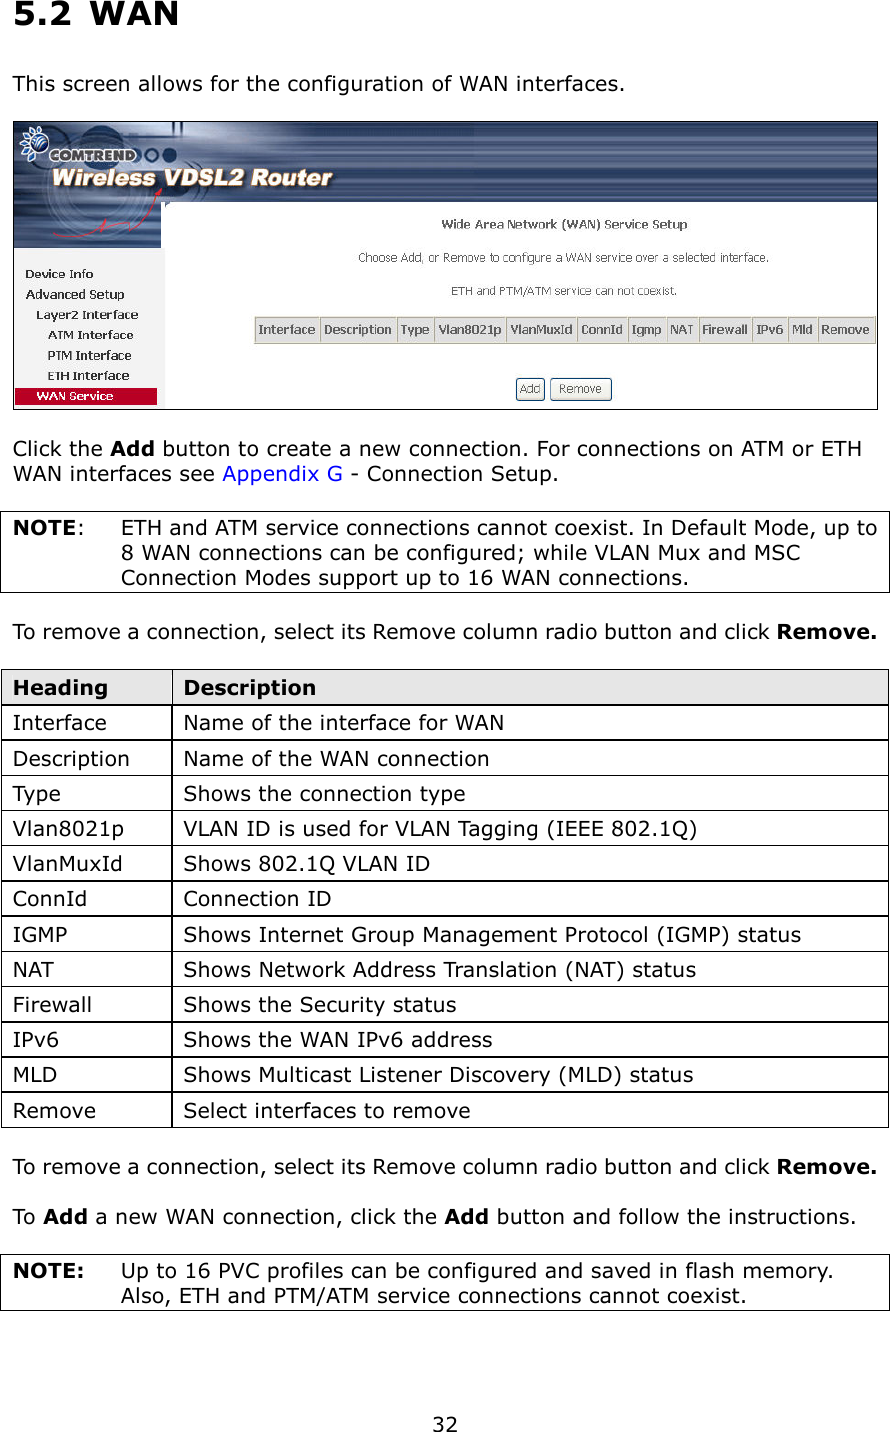   32 5.2  WAN This screen allows for the configuration of WAN interfaces.    Click the Add button to create a new connection. For connections on ATM or ETH WAN interfaces see Appendix G - Connection Setup.    NOTE:  ETH and ATM service connections cannot coexist. In Default Mode, up to 8 WAN connections can be configured; while VLAN Mux and MSC Connection Modes support up to 16 WAN connections.  To remove a connection, select its Remove column radio button and click Remove.  Heading  Description Interface    Name of the interface for WAN Description  Name of the WAN connection Type  Shows the connection type   Vlan8021p  VLAN ID is used for VLAN Tagging (IEEE 802.1Q) VlanMuxId  Shows 802.1Q VLAN ID ConnId  Connection ID IGMP  Shows Internet Group Management Protocol (IGMP) status NAT  Shows Network Address Translation (NAT) status Firewall  Shows the Security status IPv6  Shows the WAN IPv6 address MLD  Shows Multicast Listener Discovery (MLD) status Remove  Select interfaces to remove  To remove a connection, select its Remove column radio button and click Remove.  To Add a new WAN connection, click the Add button and follow the instructions.  NOTE:  Up to 16 PVC profiles can be configured and saved in flash memory.   Also, ETH and PTM/ATM service connections cannot coexist.  